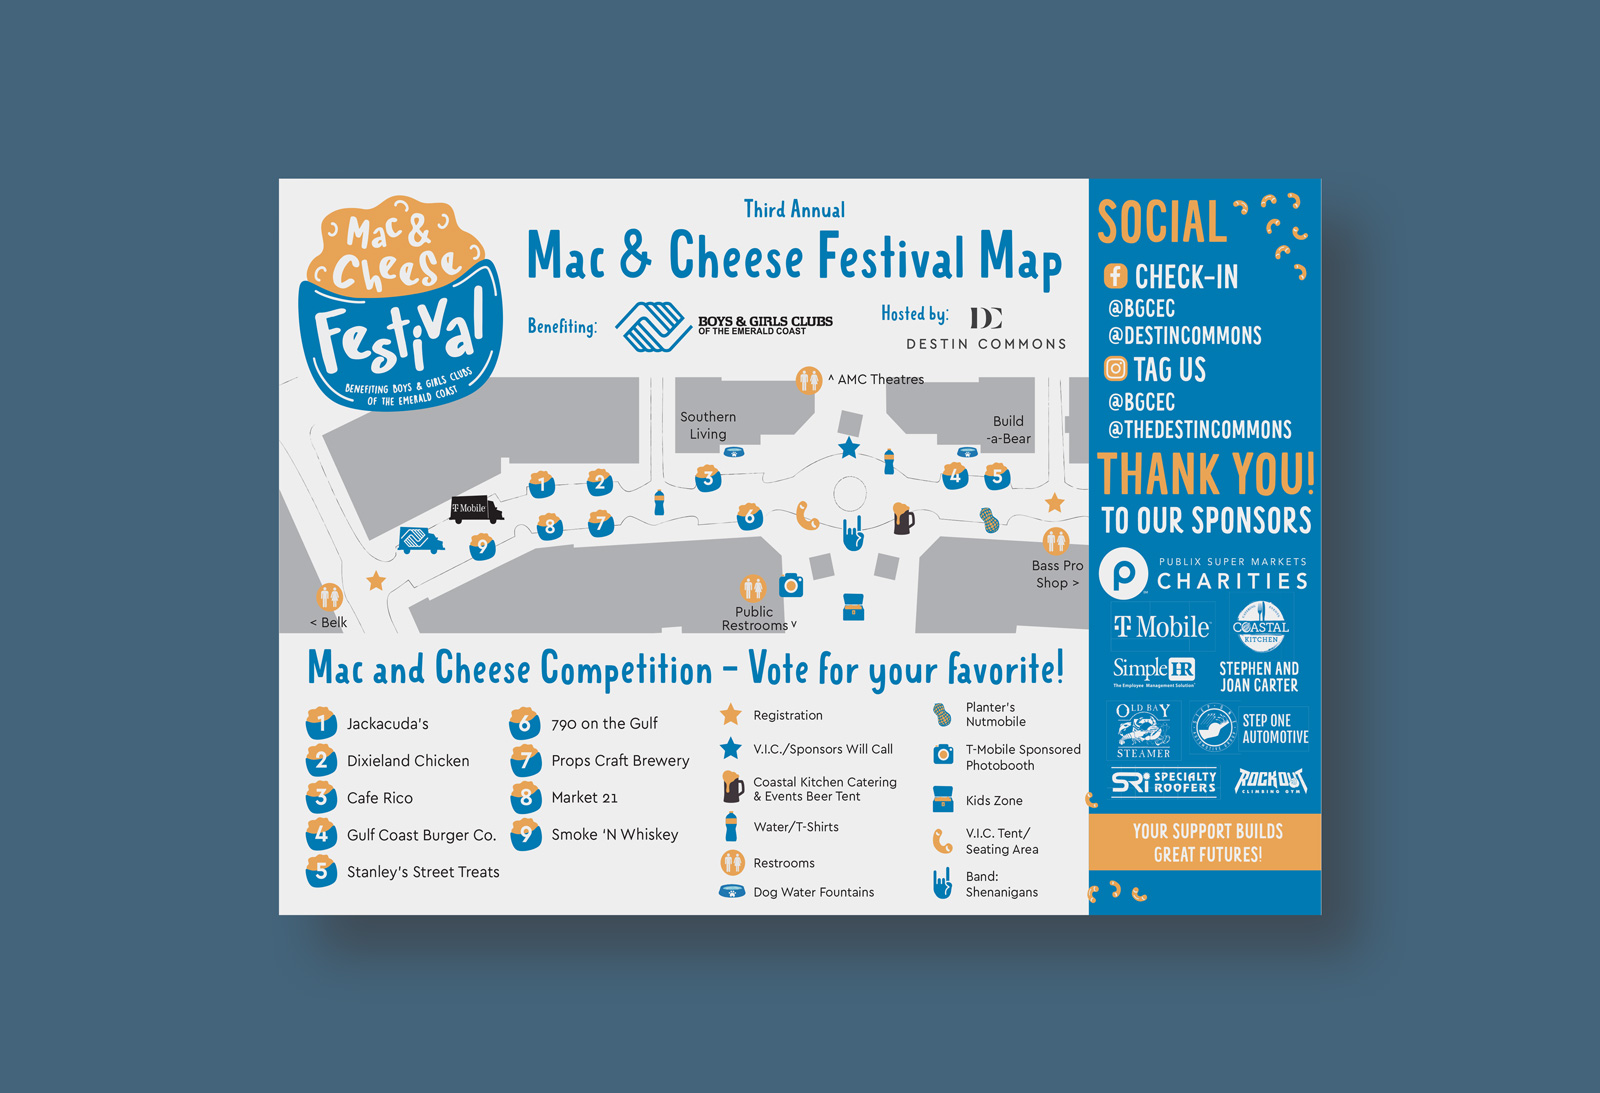 2021 Mac & Cheese Festival, Boys & Girls Club of Emerald Coast held at the Destin Commons, Frances Roy Agency Map